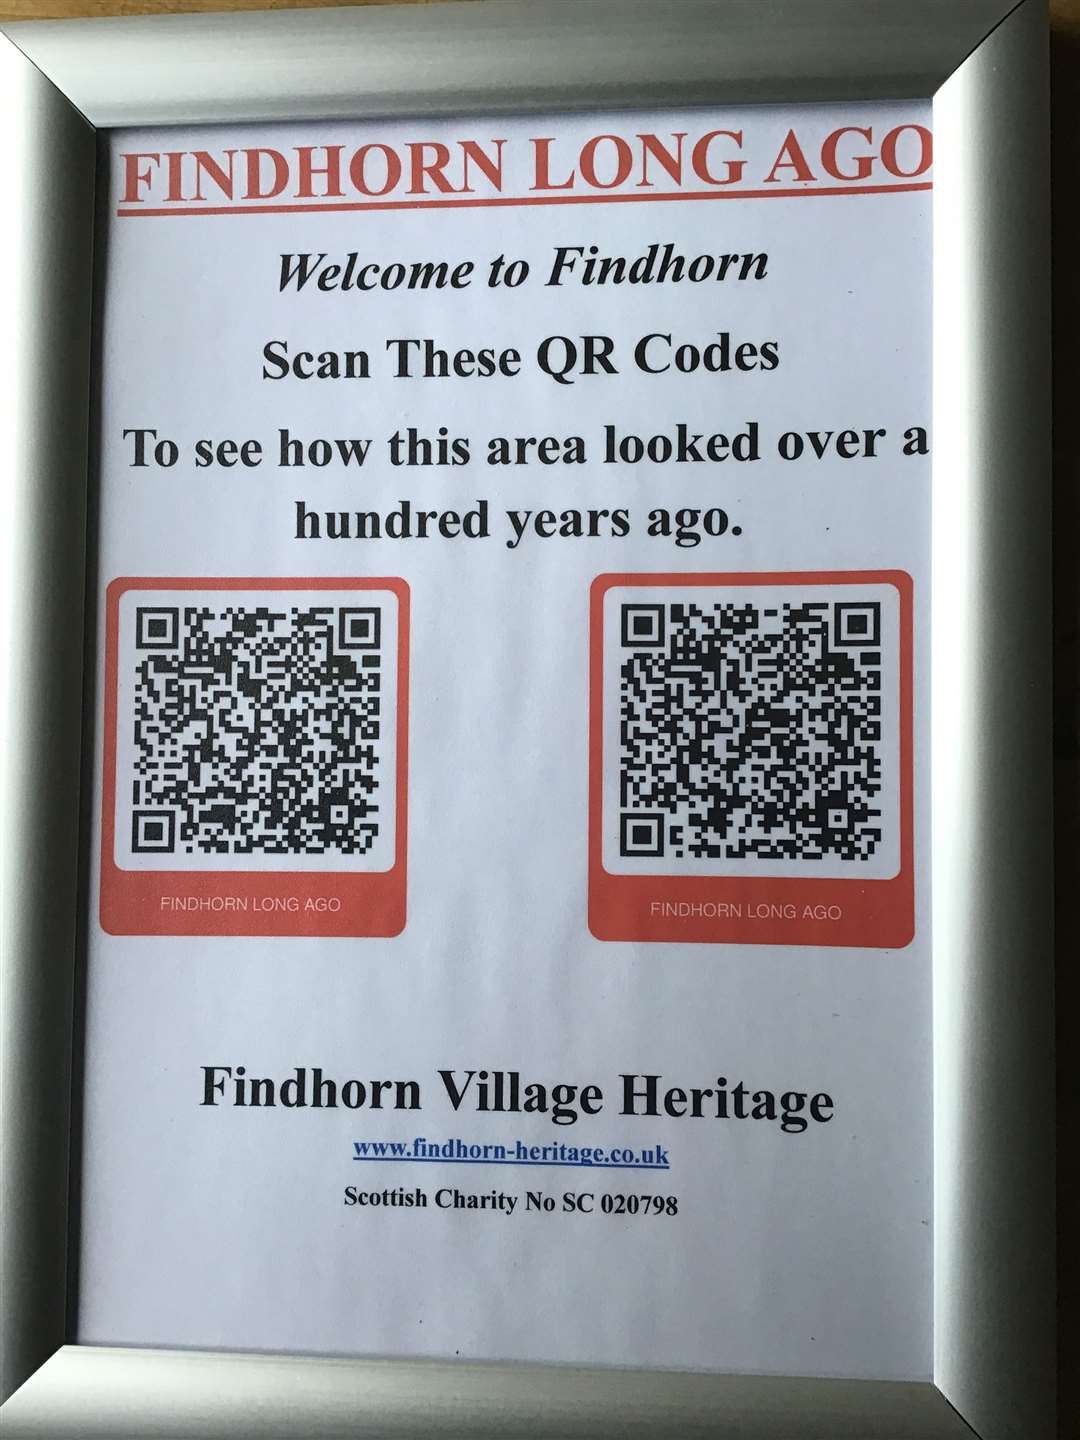 The heritage team are placing informative QR codes around the village.